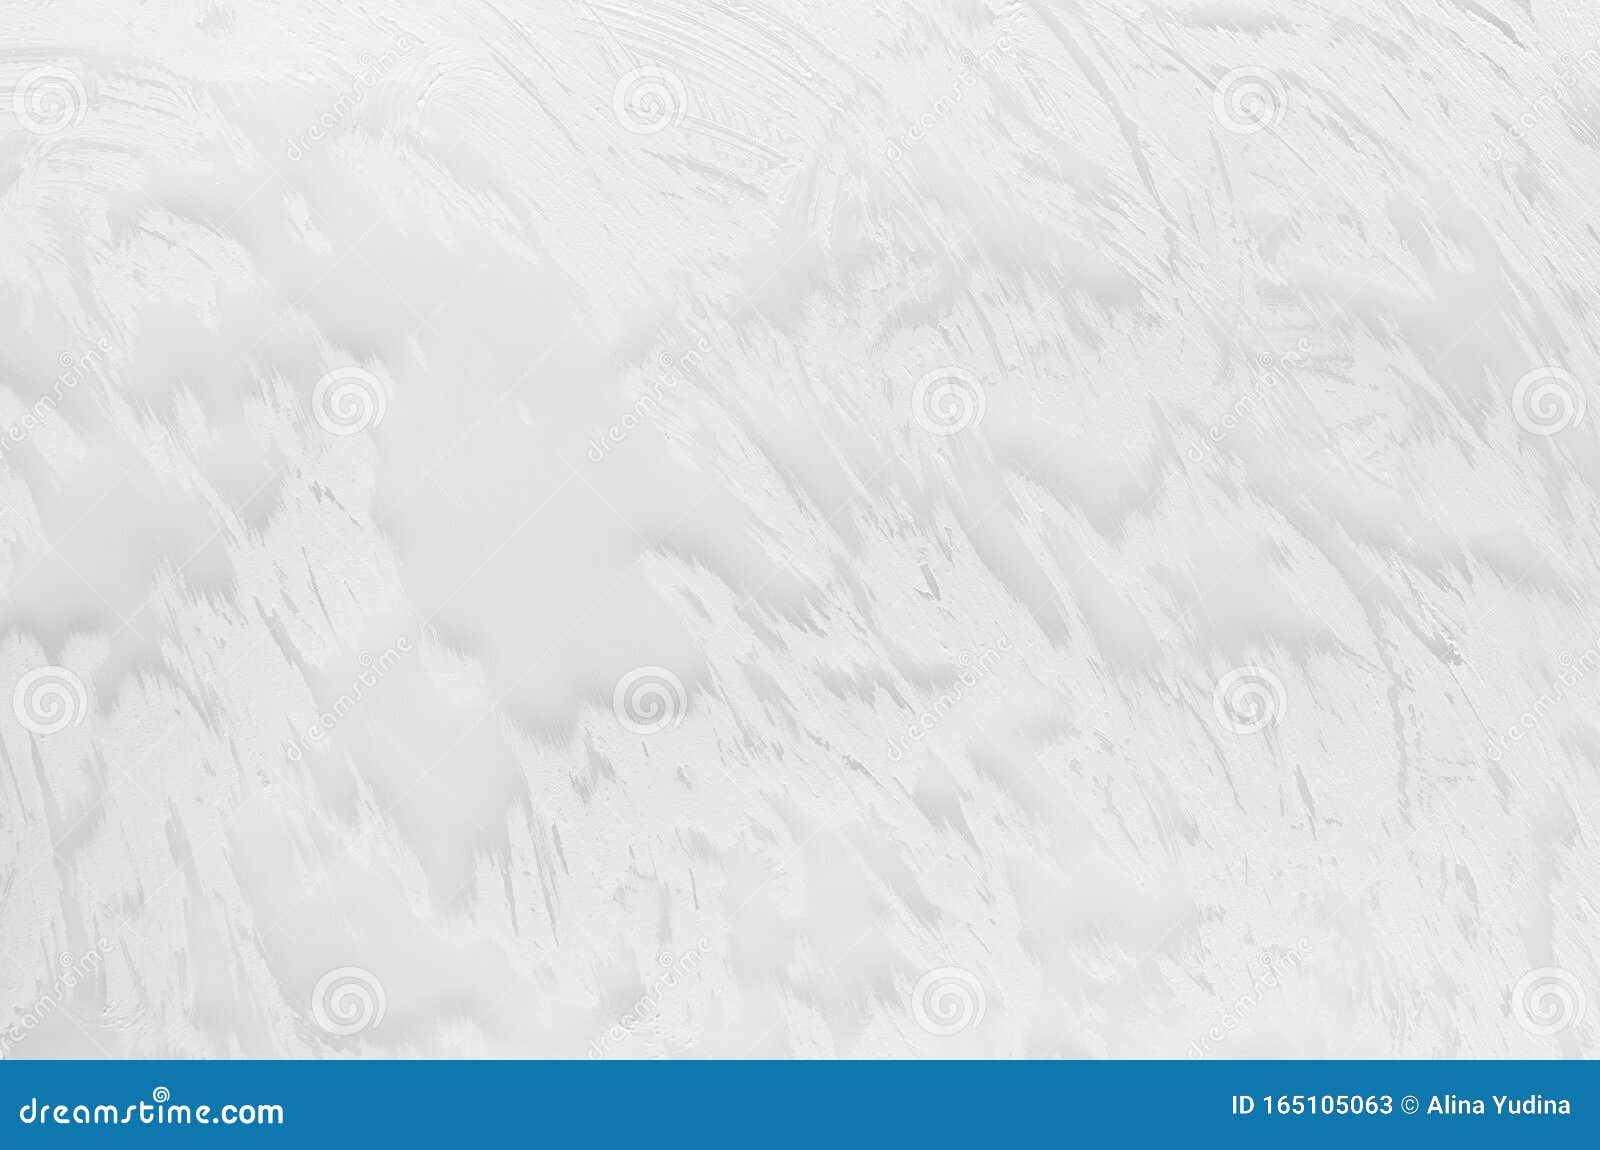 White Rough Dry Plaster Texture with Waves As Surf As Simple Abstract  Background. Stock Image - Image of striped, paint: 165105063